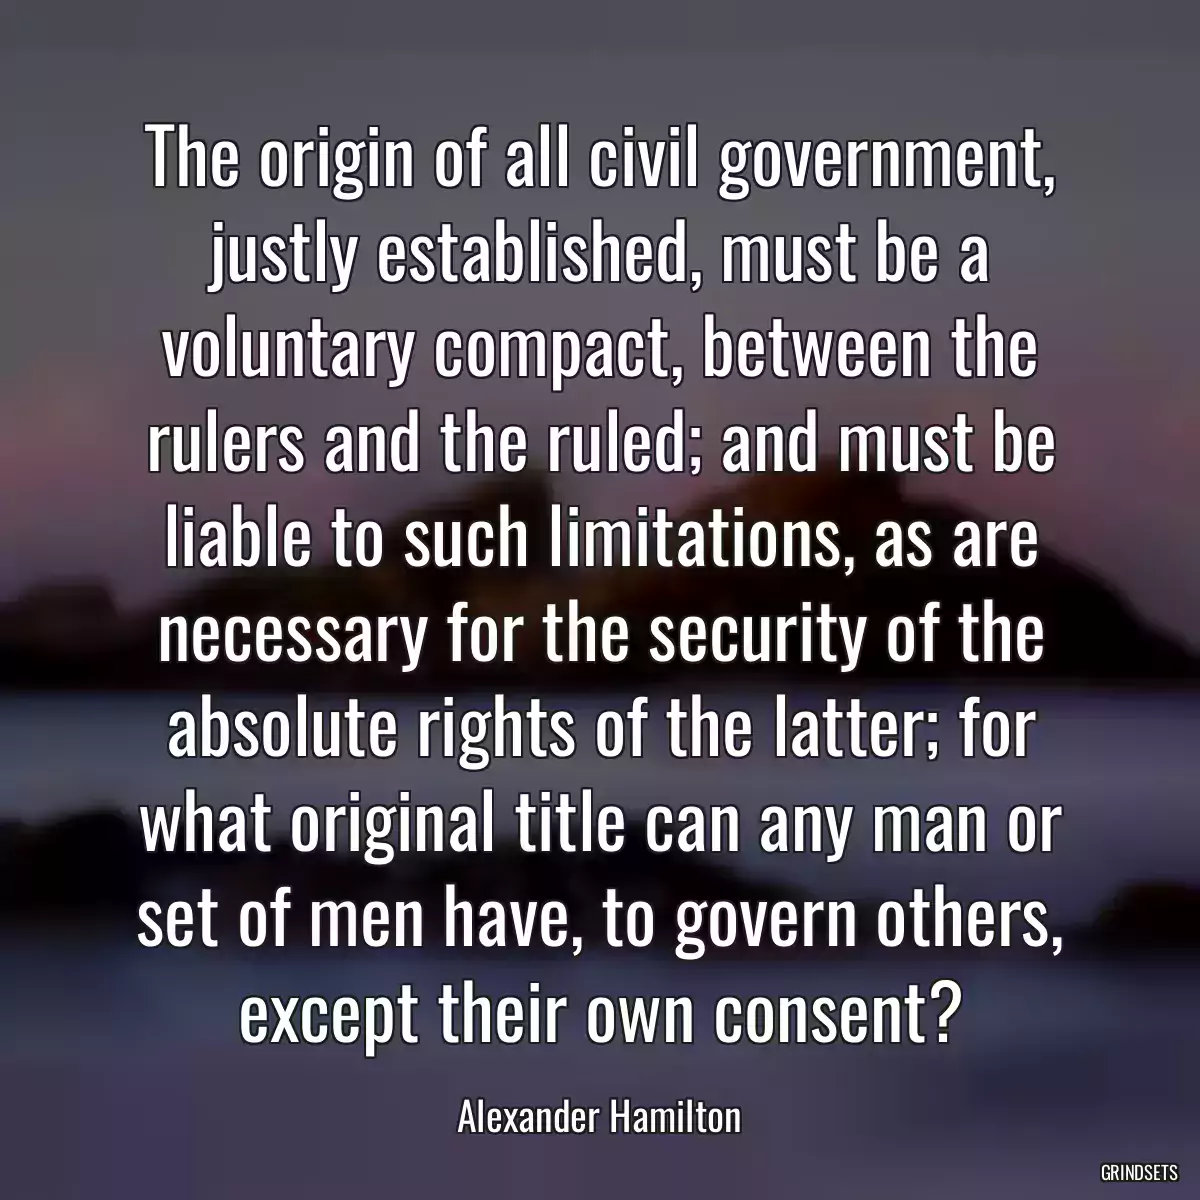 The origin of all civil government, justly established, must be a voluntary compact, between the rulers and the ruled; and must be liable to such limitations, as are necessary for the security of the absolute rights of the latter; for what original title can any man or set of men have, to govern others, except their own consent?